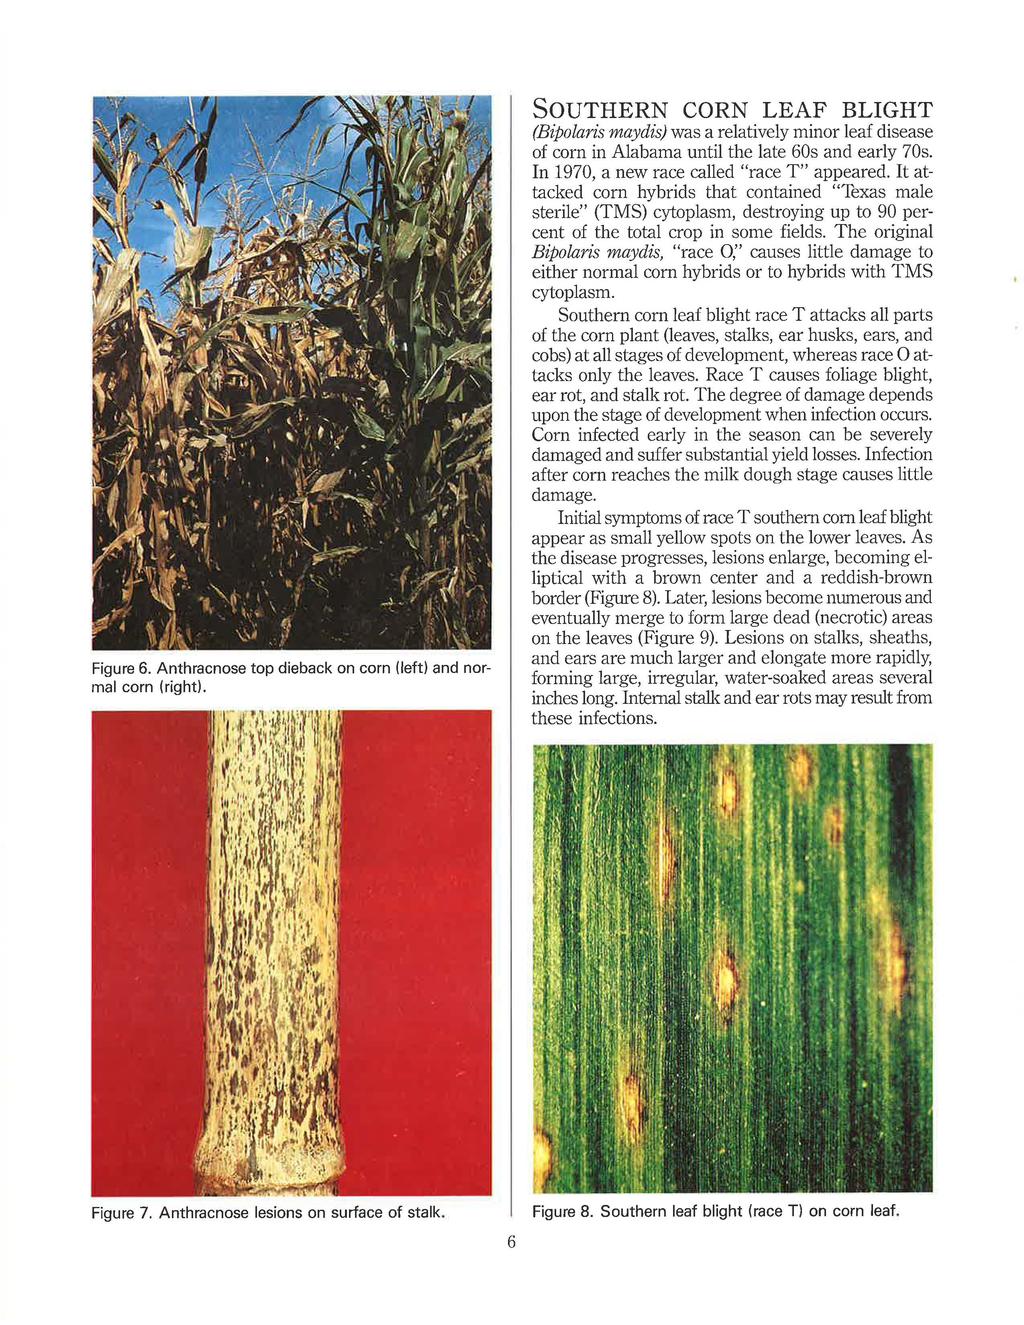 Figure 6. Anthracnose top dieback on corn (left) and normal corn (right).